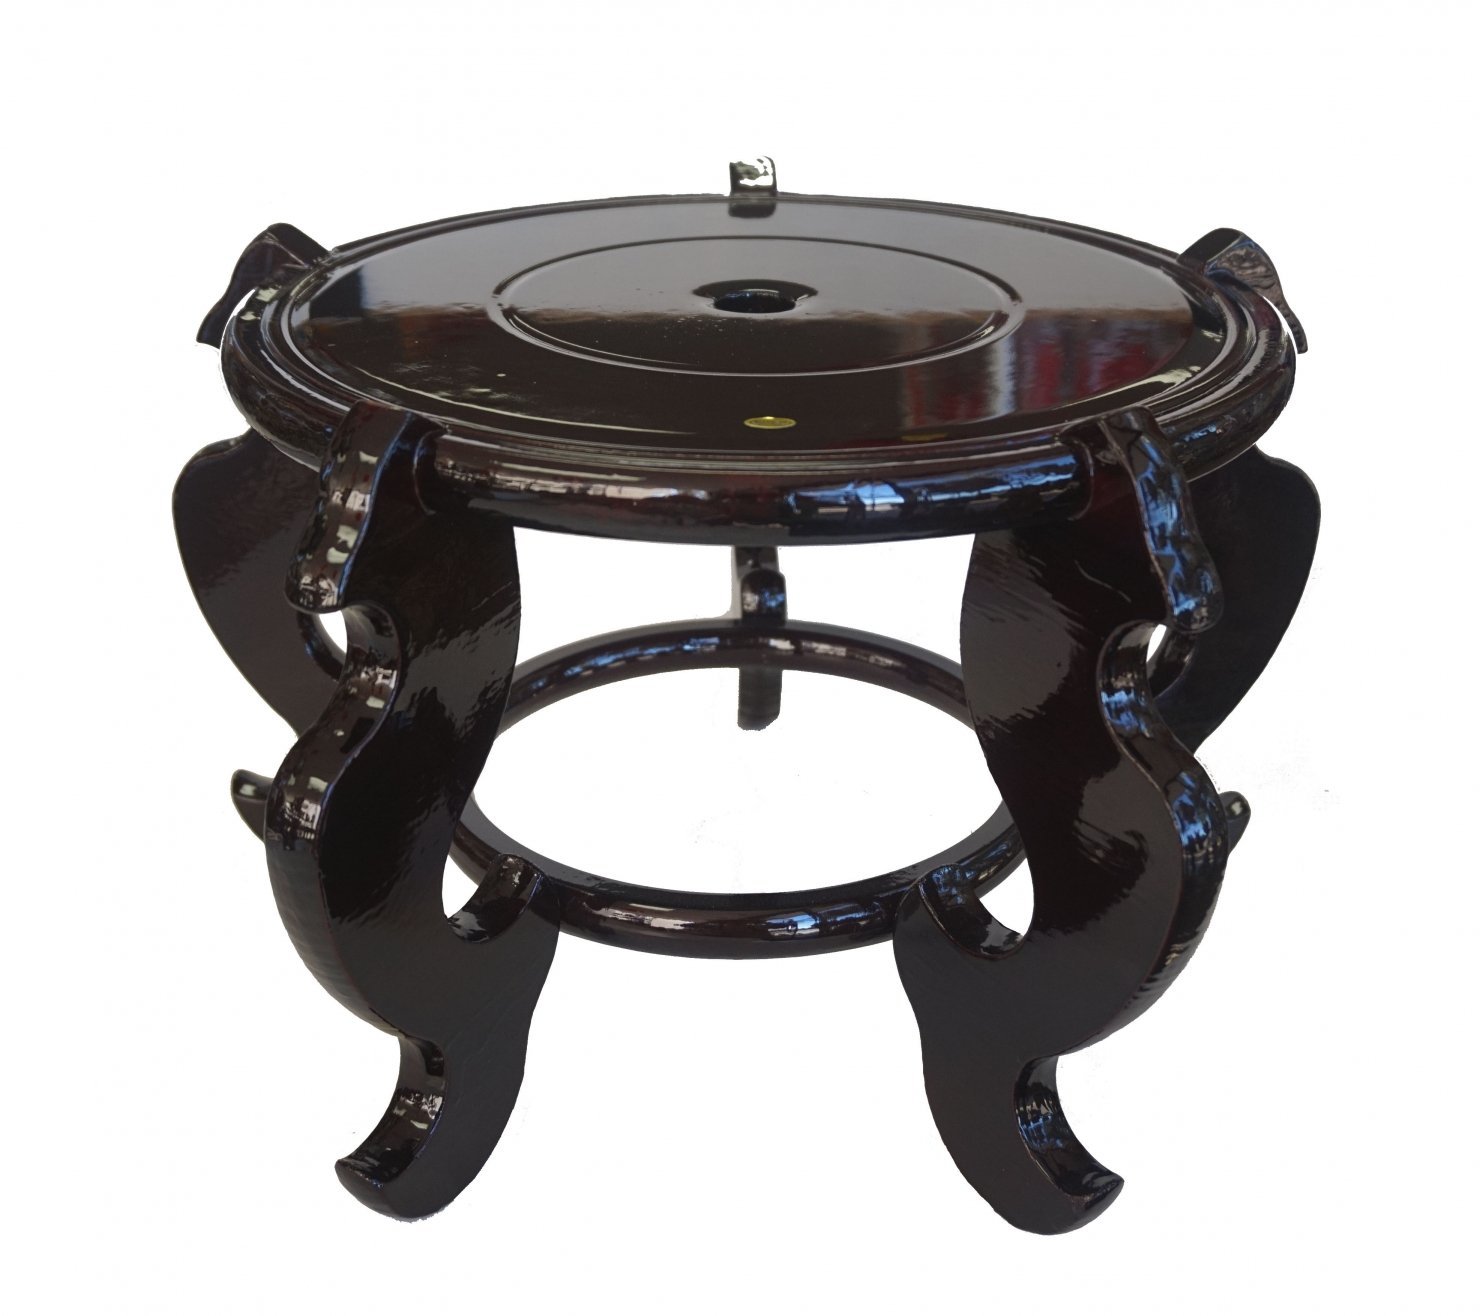 Feng Shui Import Fishbowl Stand - Size 10.5"